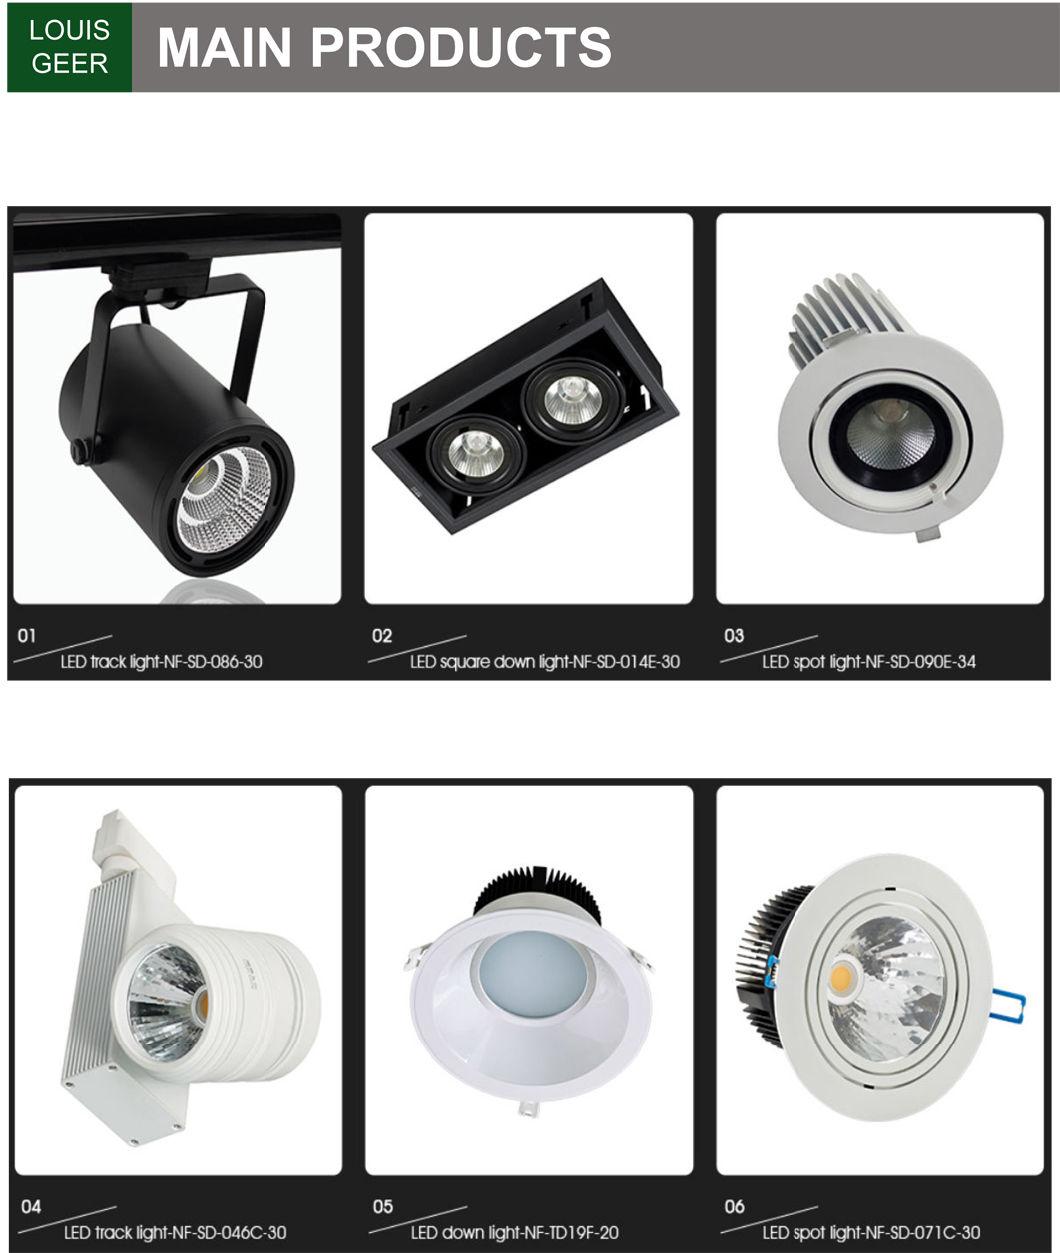 High CRI Angle Adjustable Ce RoHS Approved Hotel Residential Lighting Three Heads 36W 45W LED Grille Downlight